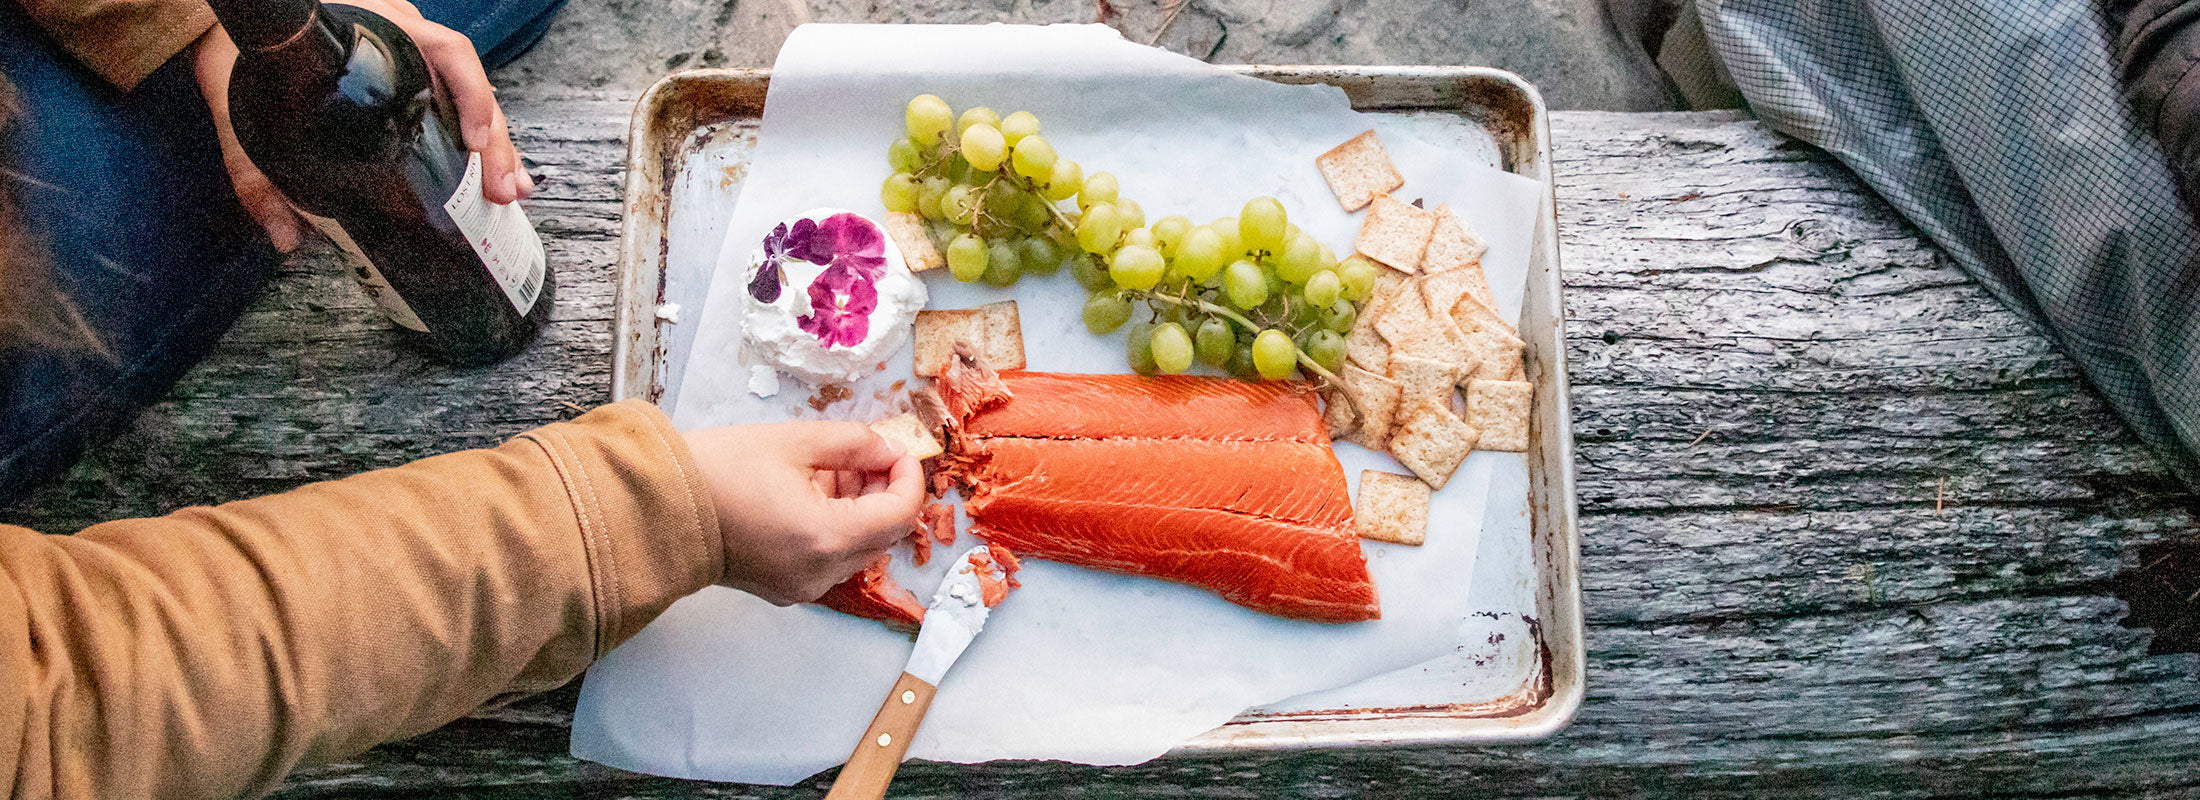 Hands reach out to a beach picnic tray covered with Patagonia Provisions Wild Sockeye Salmon, crackers, fresh grapes and goat cheese